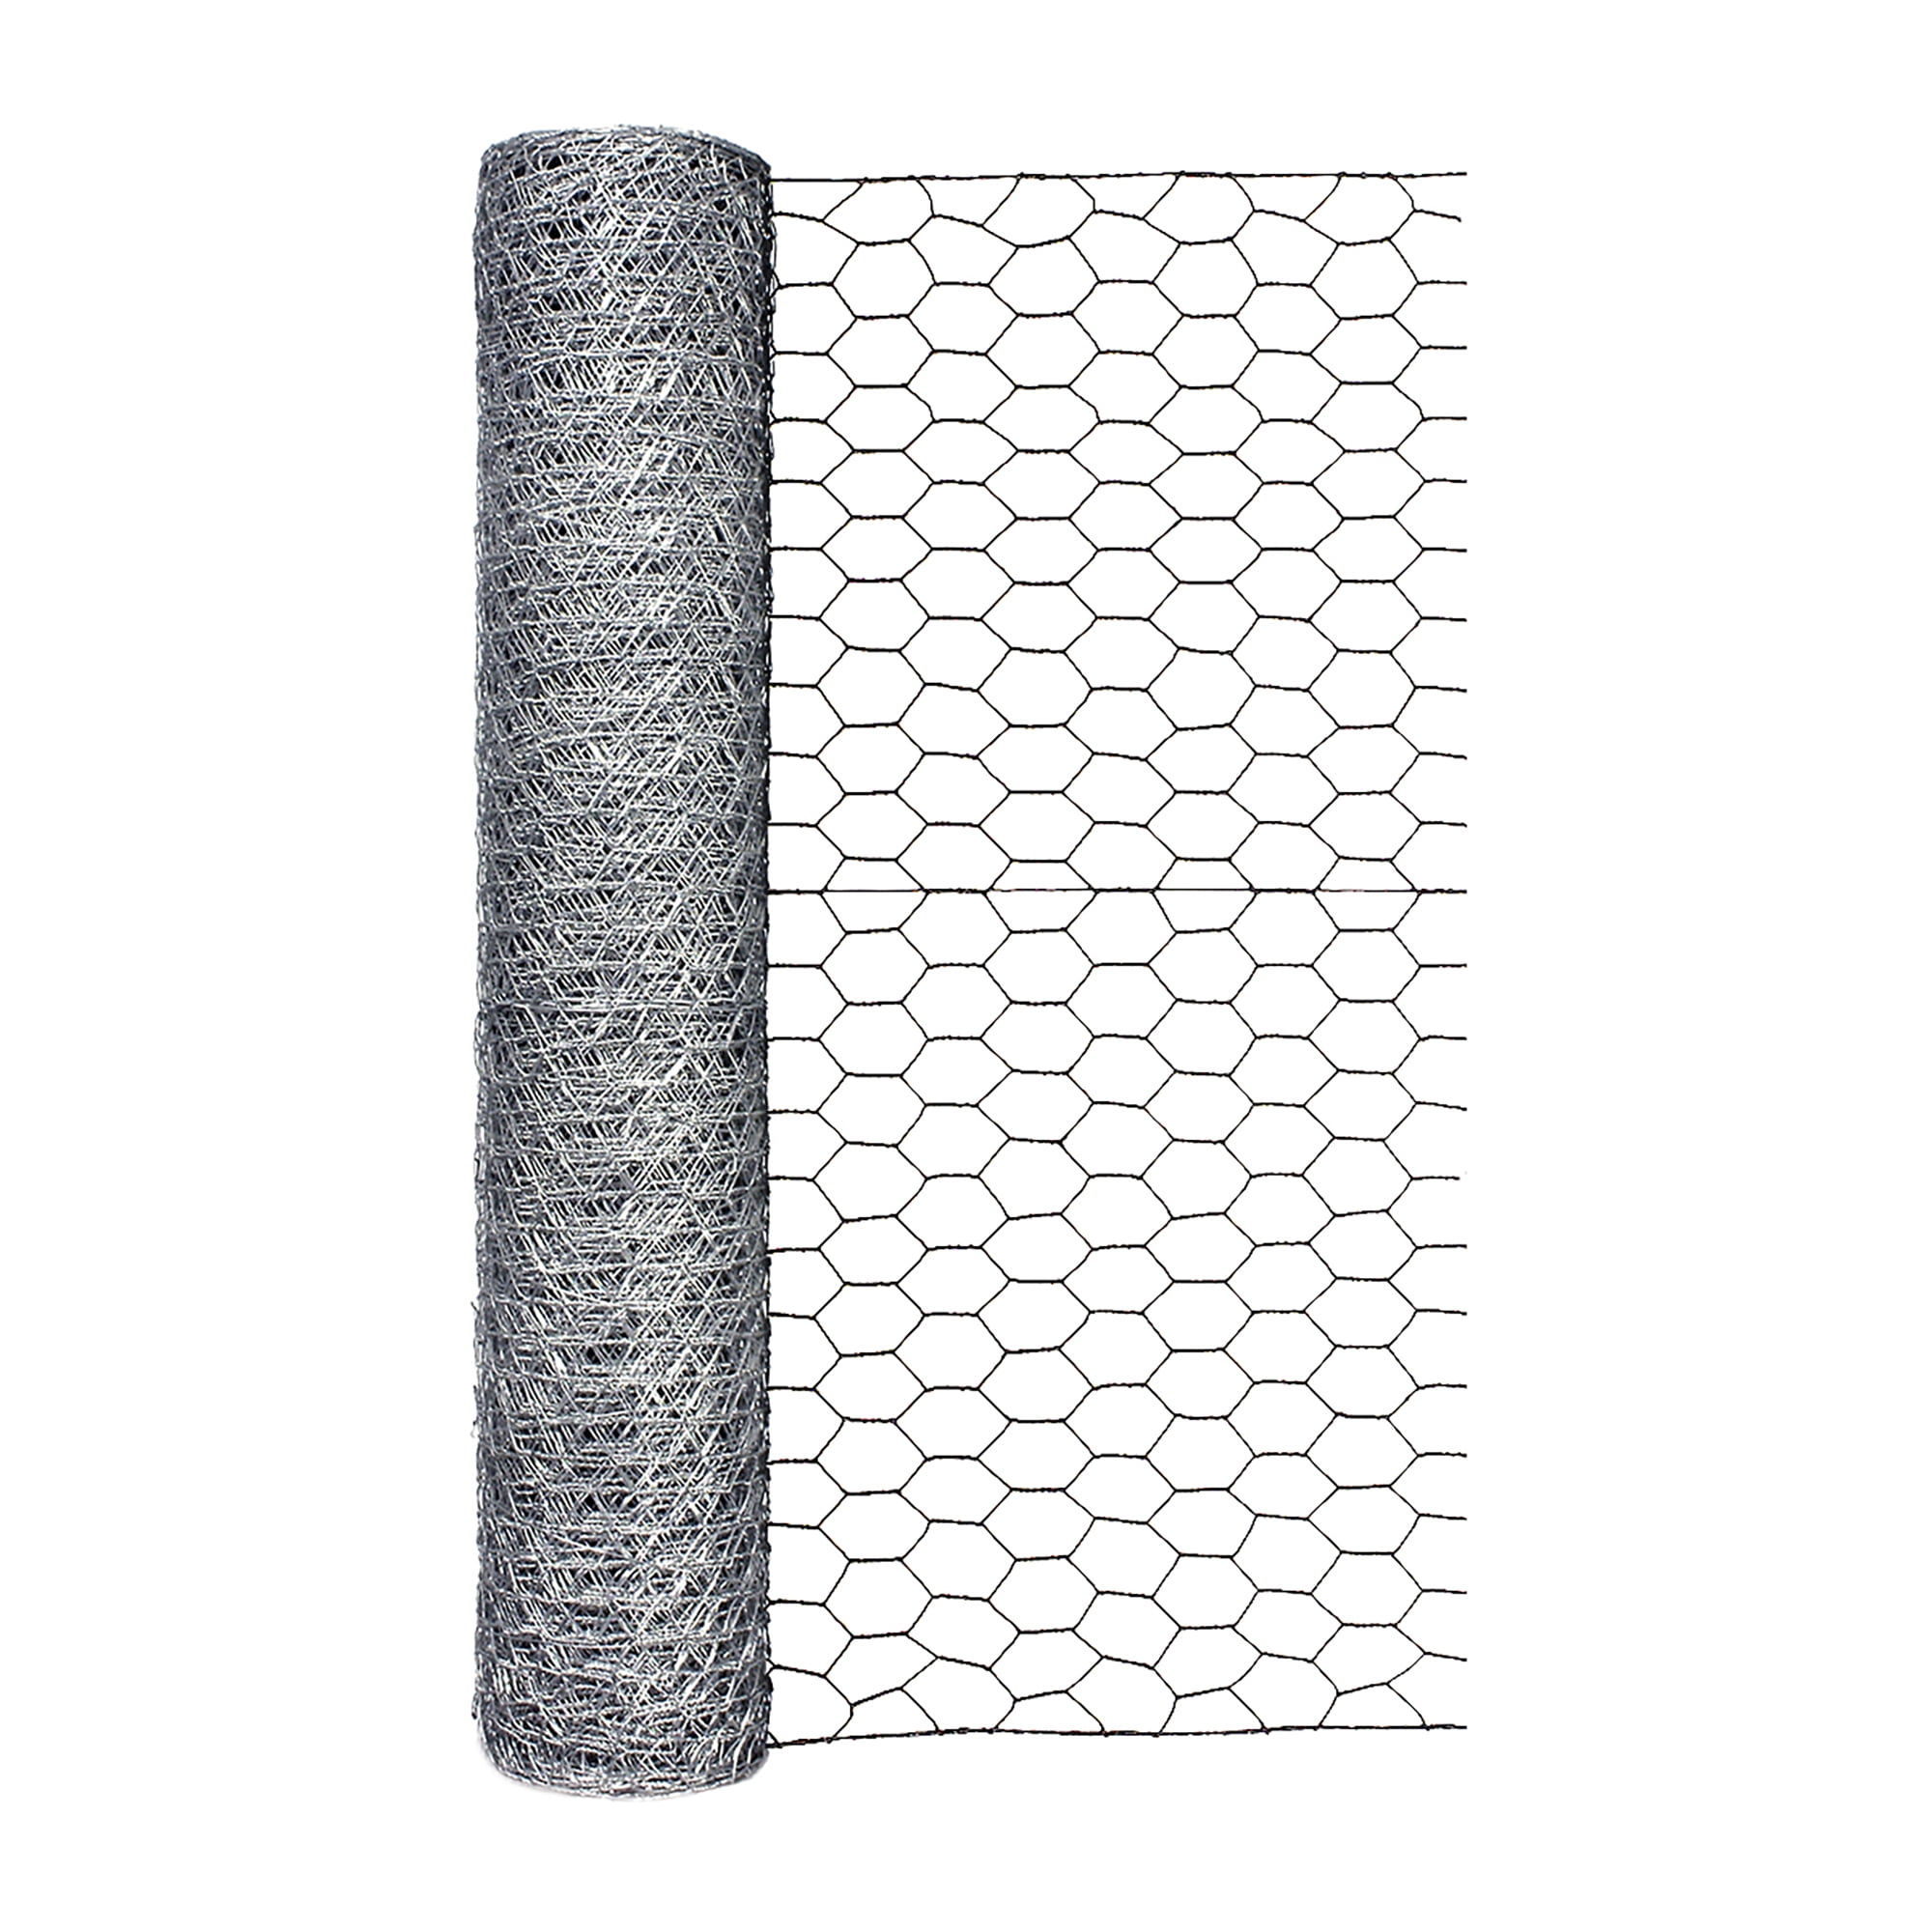 G&B 308476B 48" x 50' ft  2" Mesh Galvanized Poultry Netting Chicken Wire Fence 